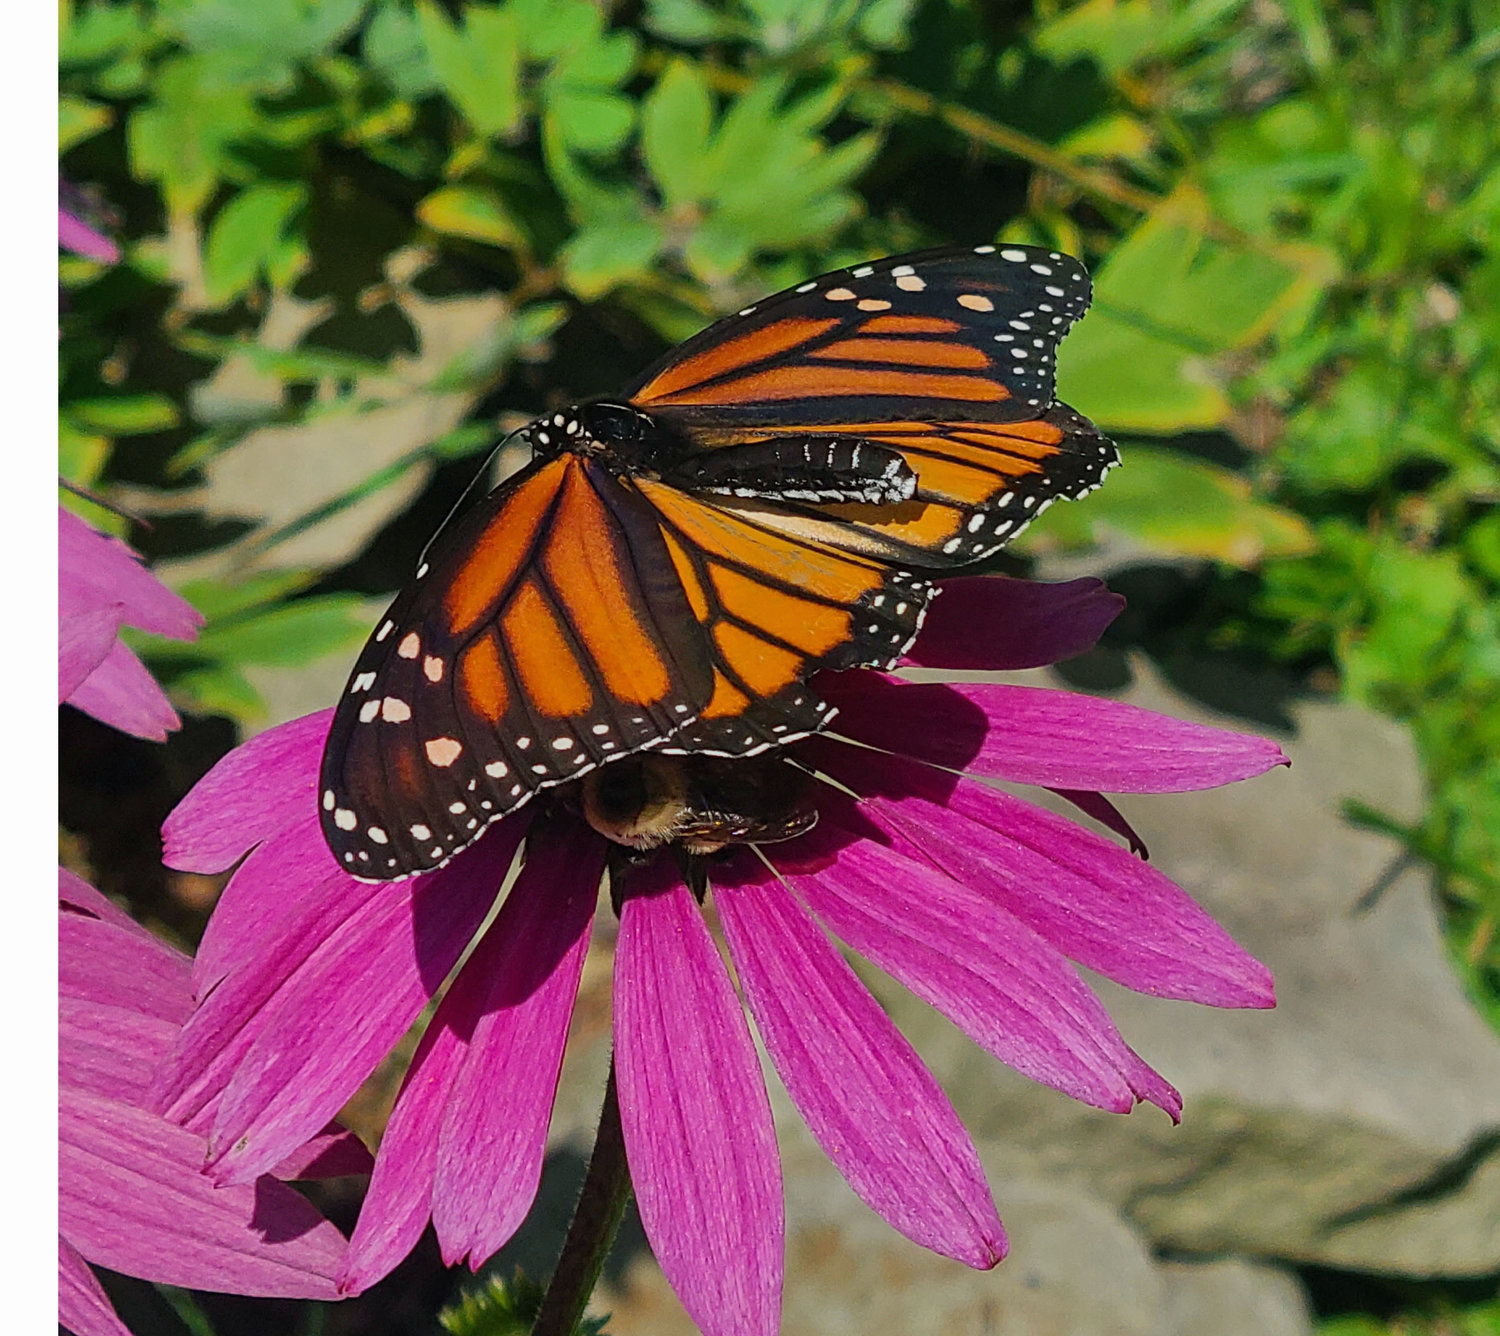 This is a Monarch butterfly in a friend’s garden in Wayne County, PA. The butterflies spend significant time foraging for nectar, and the migrants make frequent stops during their long trip, keeping  themselves re-fueled for their journey. This is a female, and she may have up to 300 eggs to lay, usually 1- 2 eggs per milkweed plant.